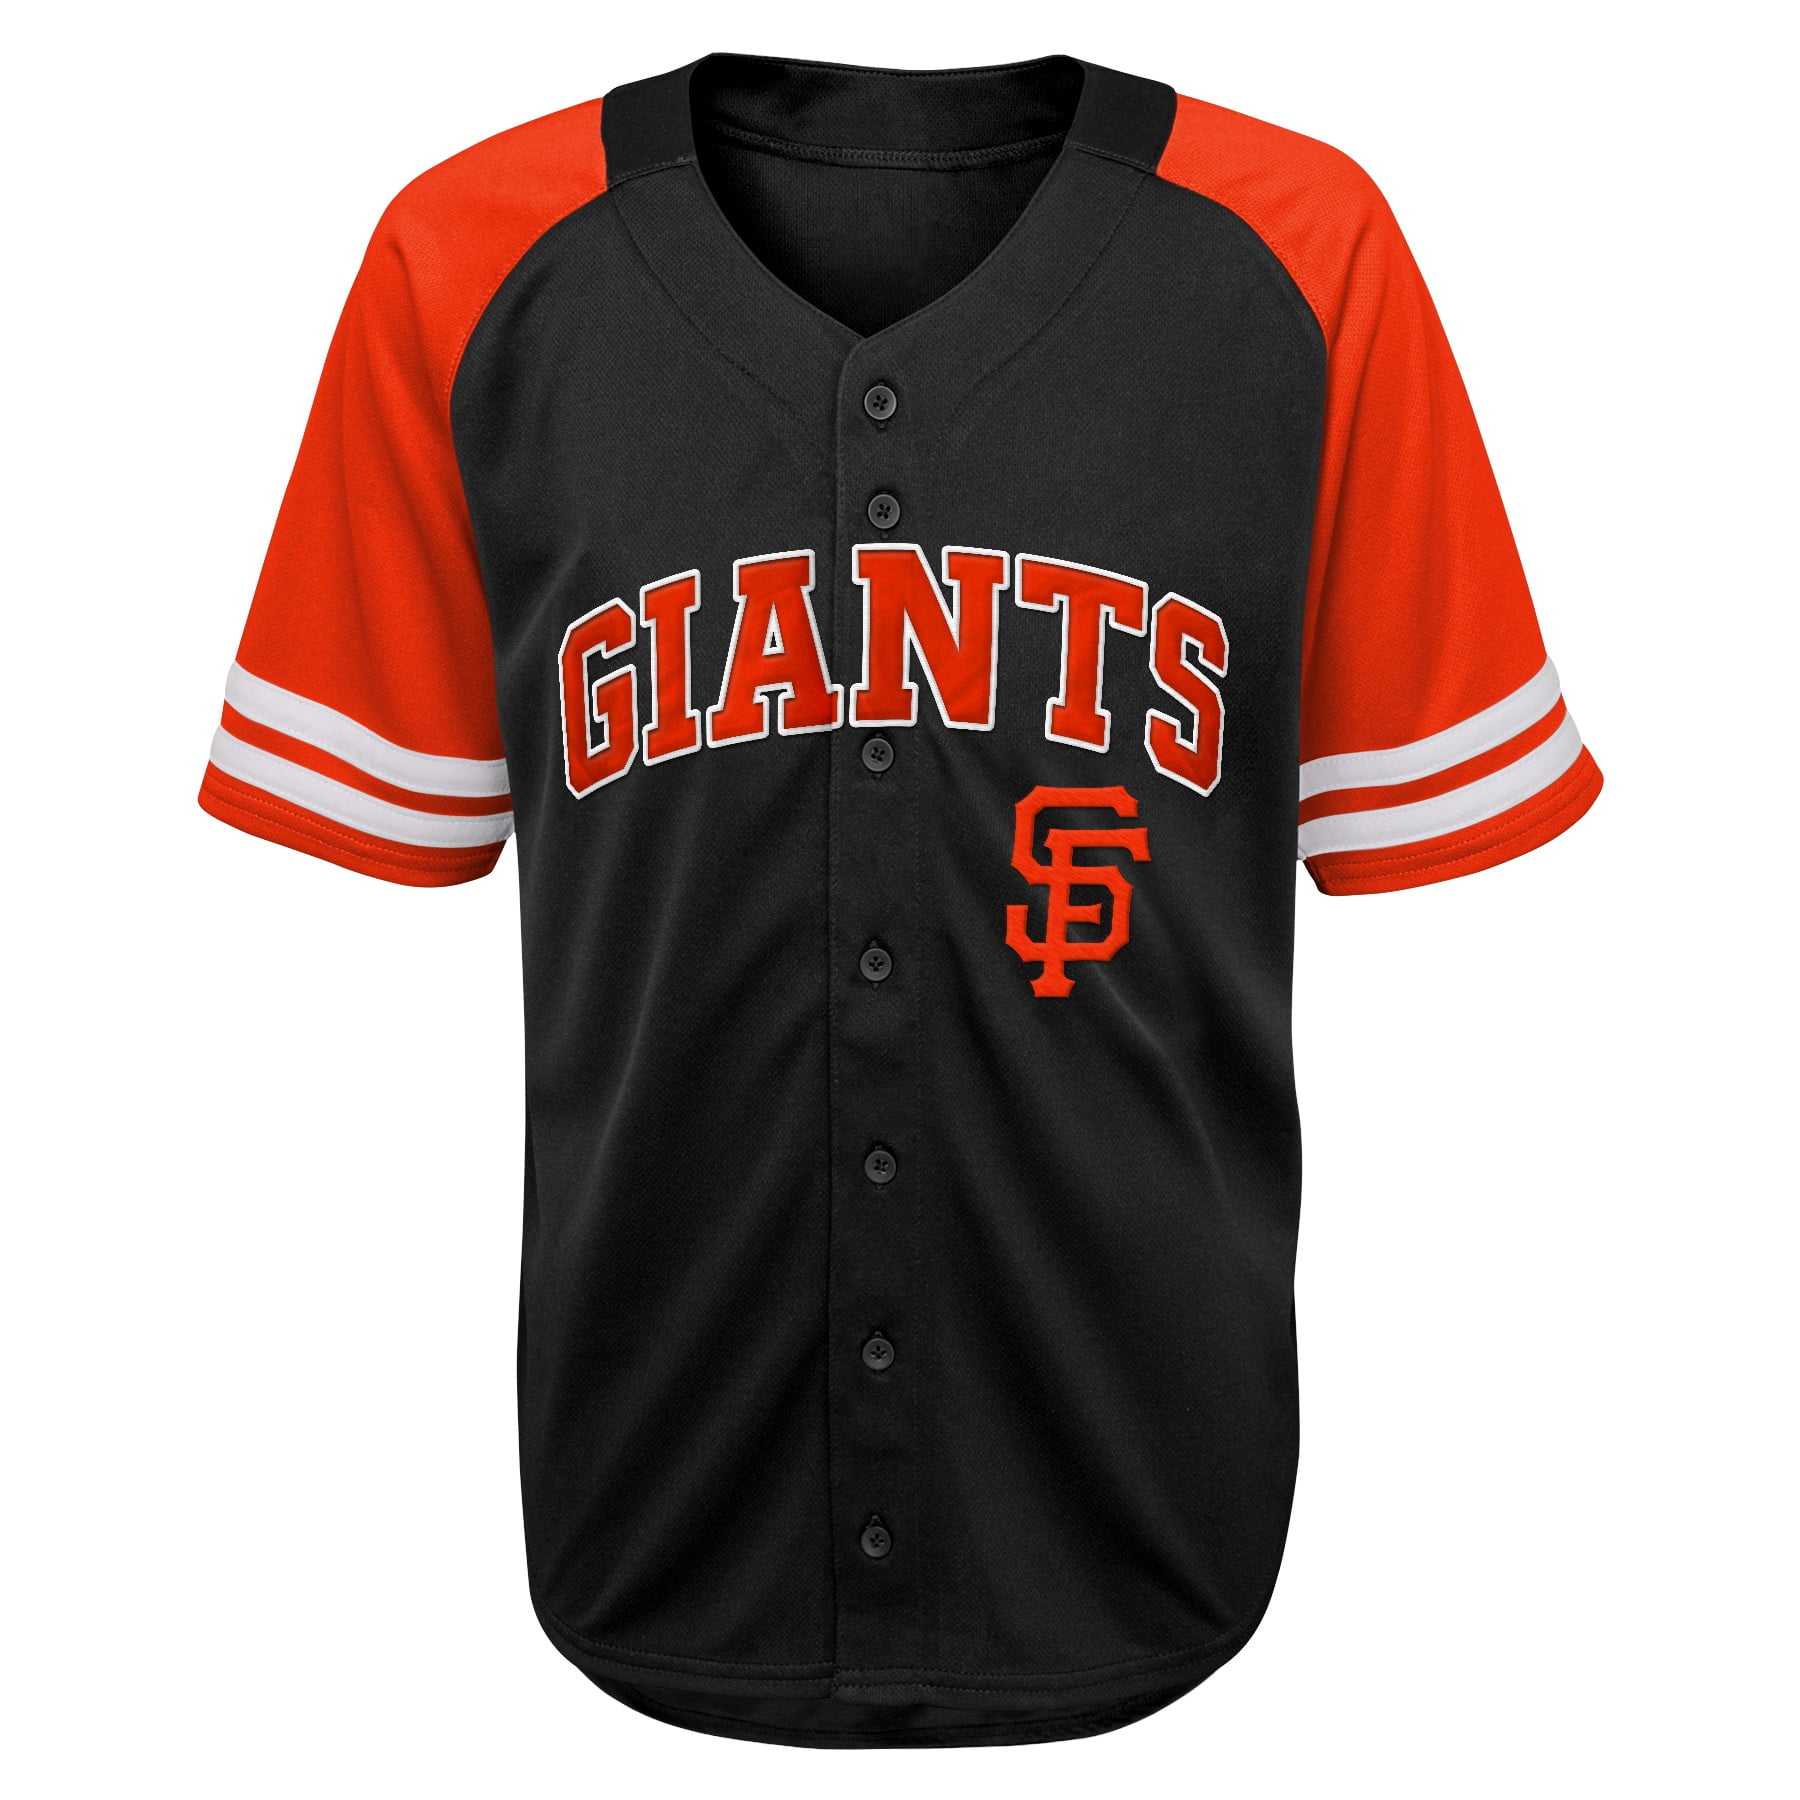 San Francisco Giants Youth Team Jersey 